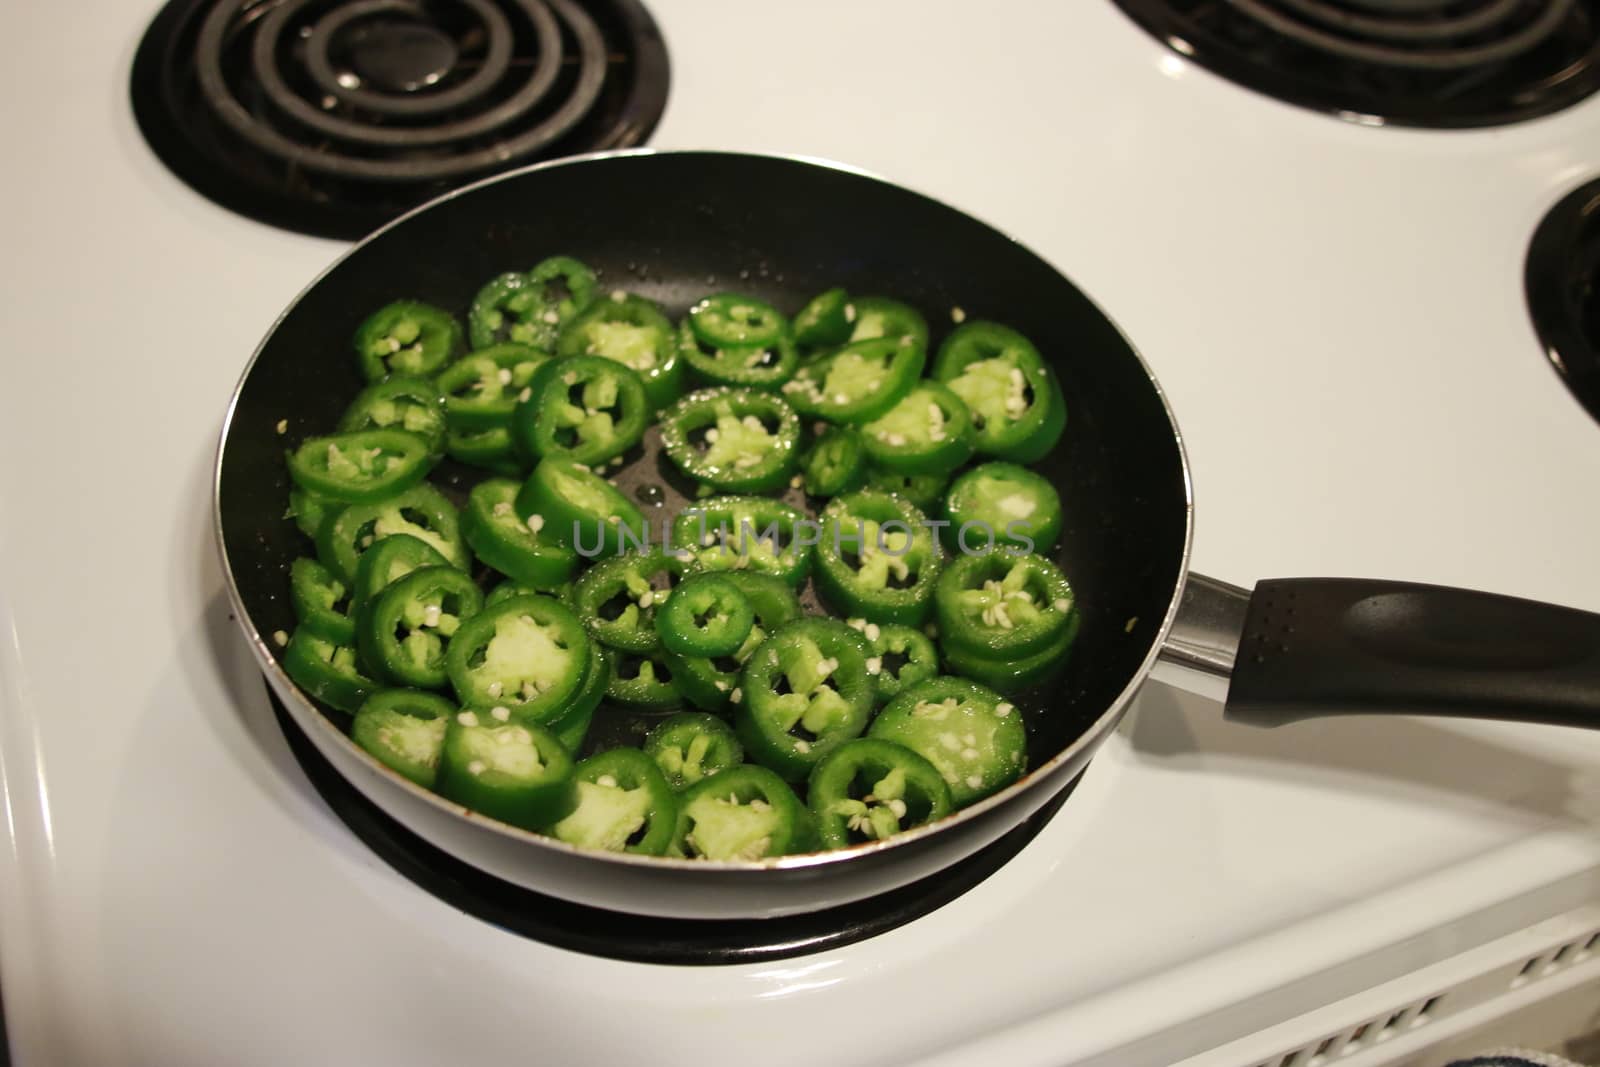 cooking jalapenos in a frying pan to make them for sandwiches.